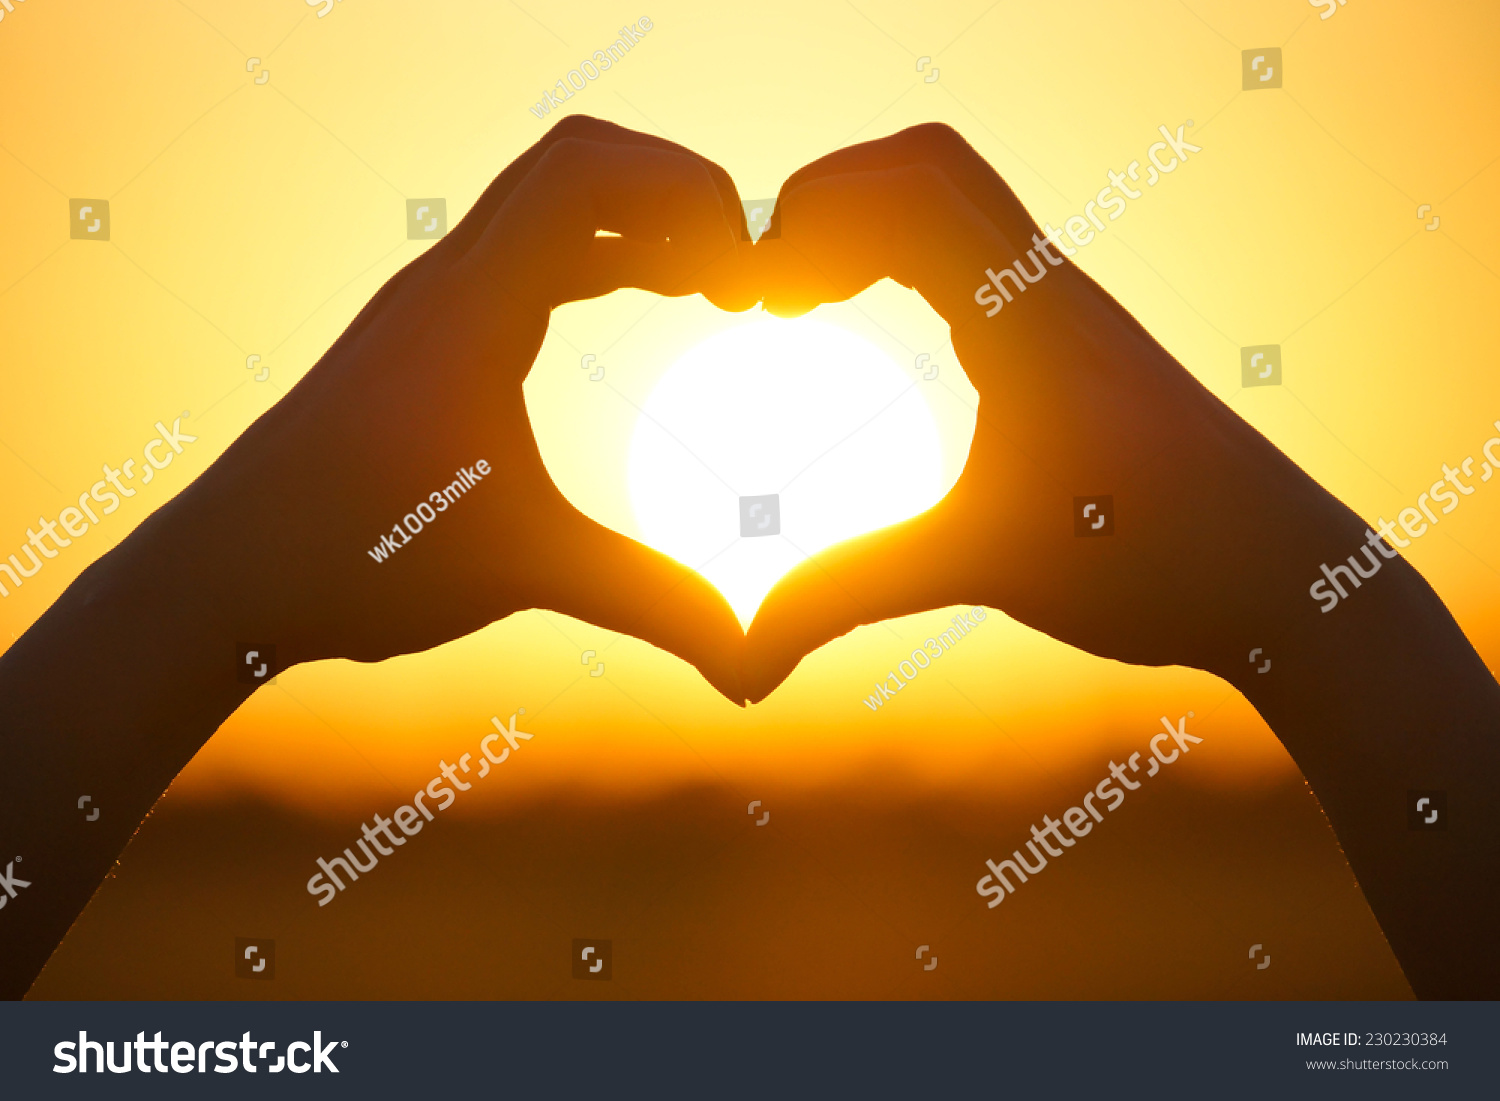 Hands Forming A Heart Shape With Sunset Silhouette Stock Photo 